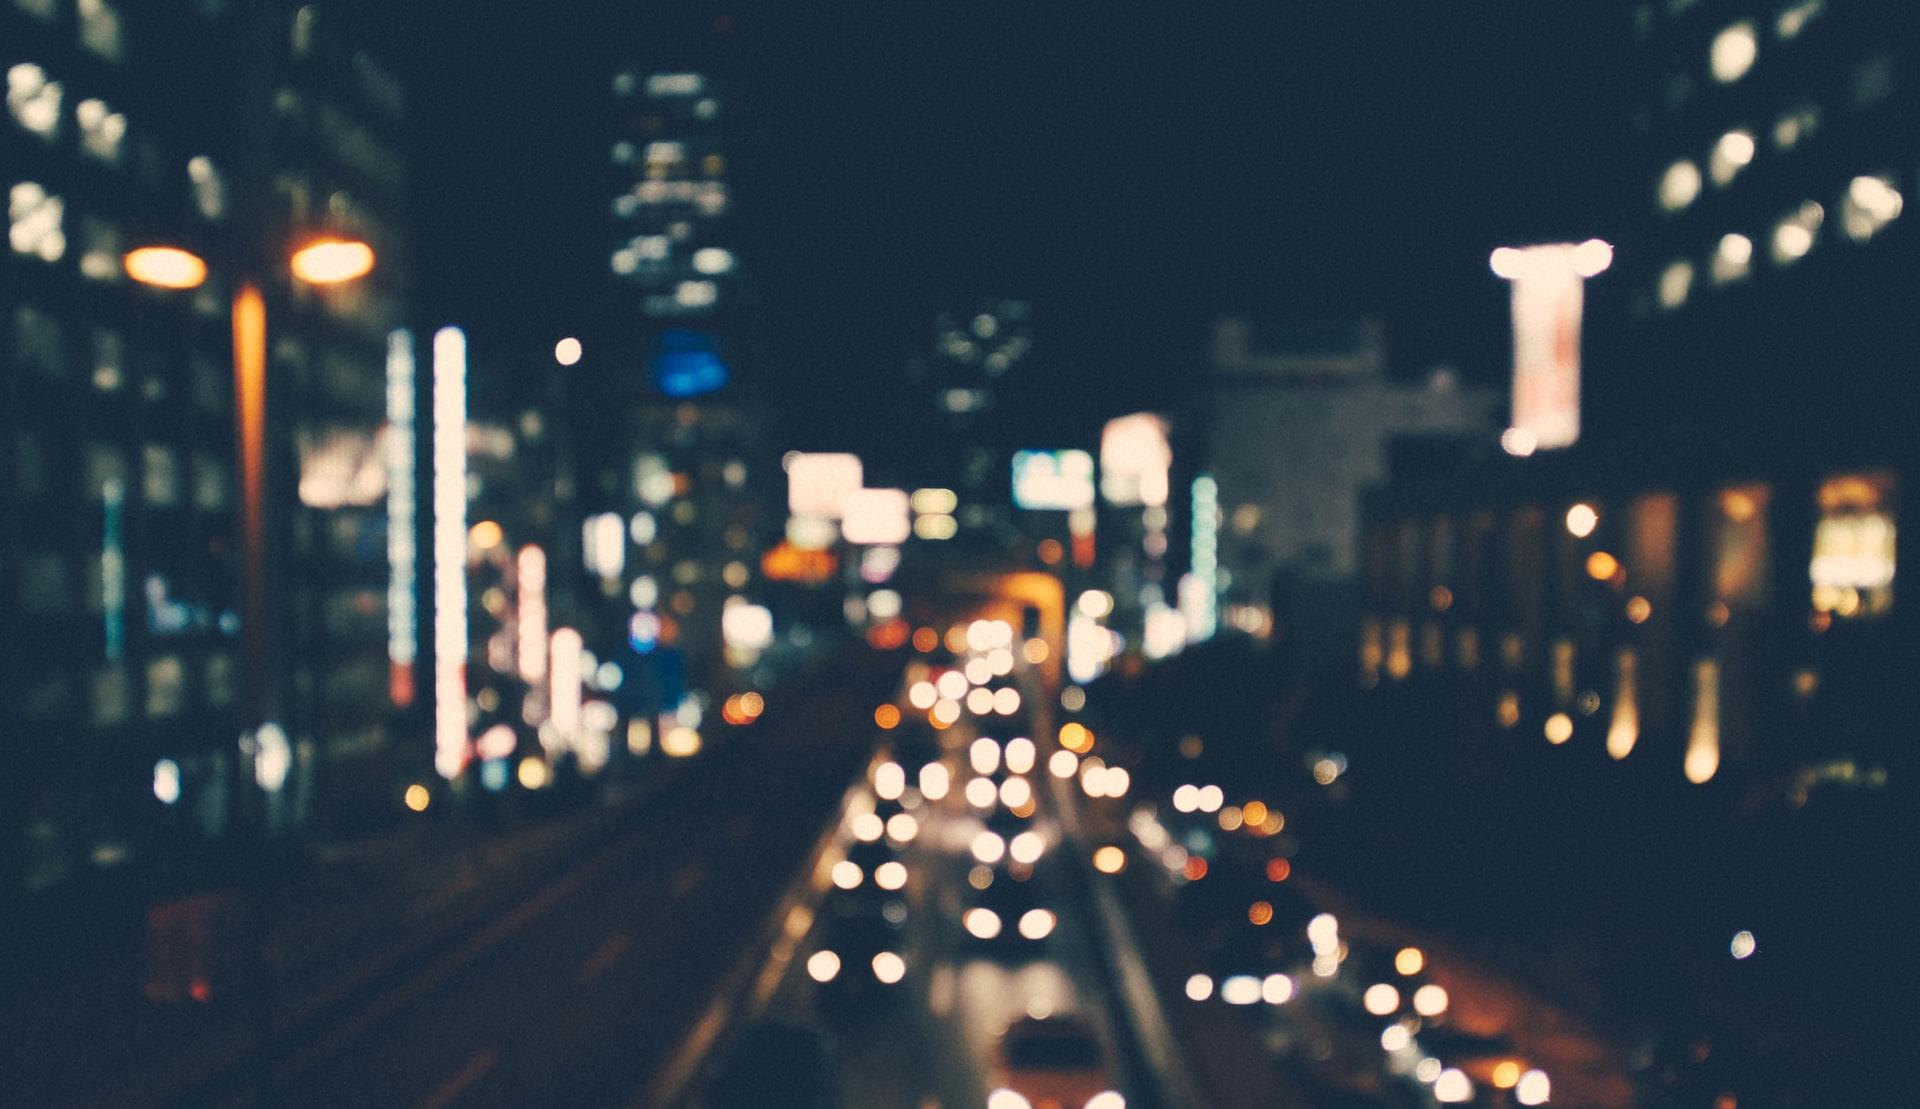 A blurry shot of a city street lit up by buildings and cars at night